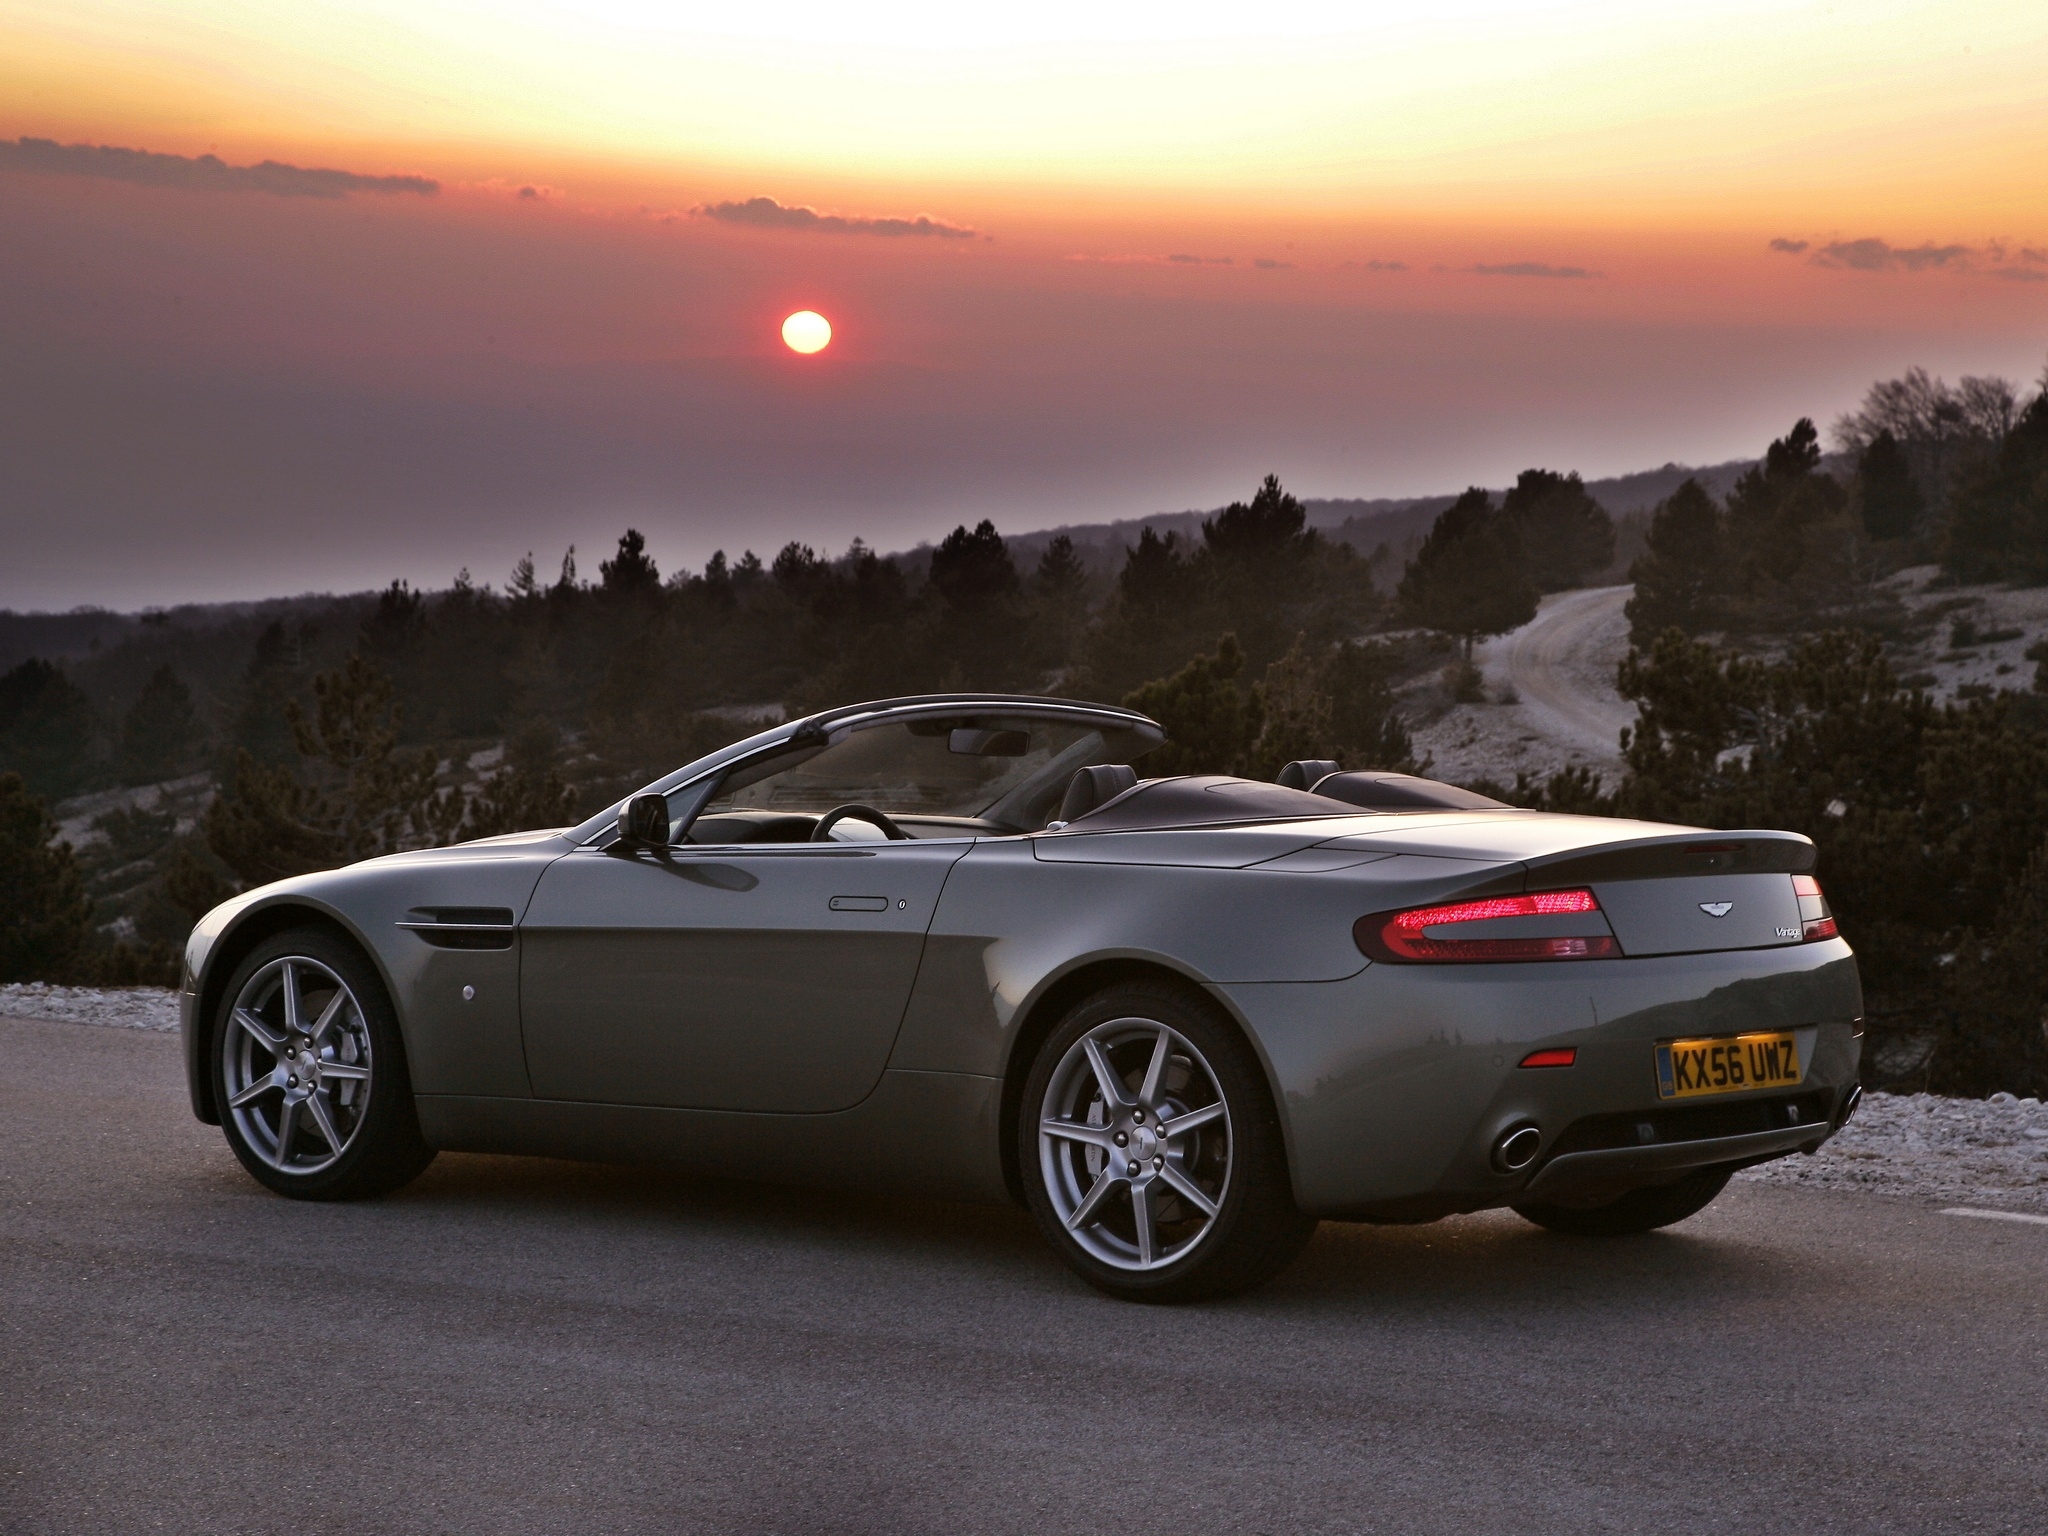 HD wallpaper auto, trees, sunset, aston martin, cars, grey, side view, v8, 2006